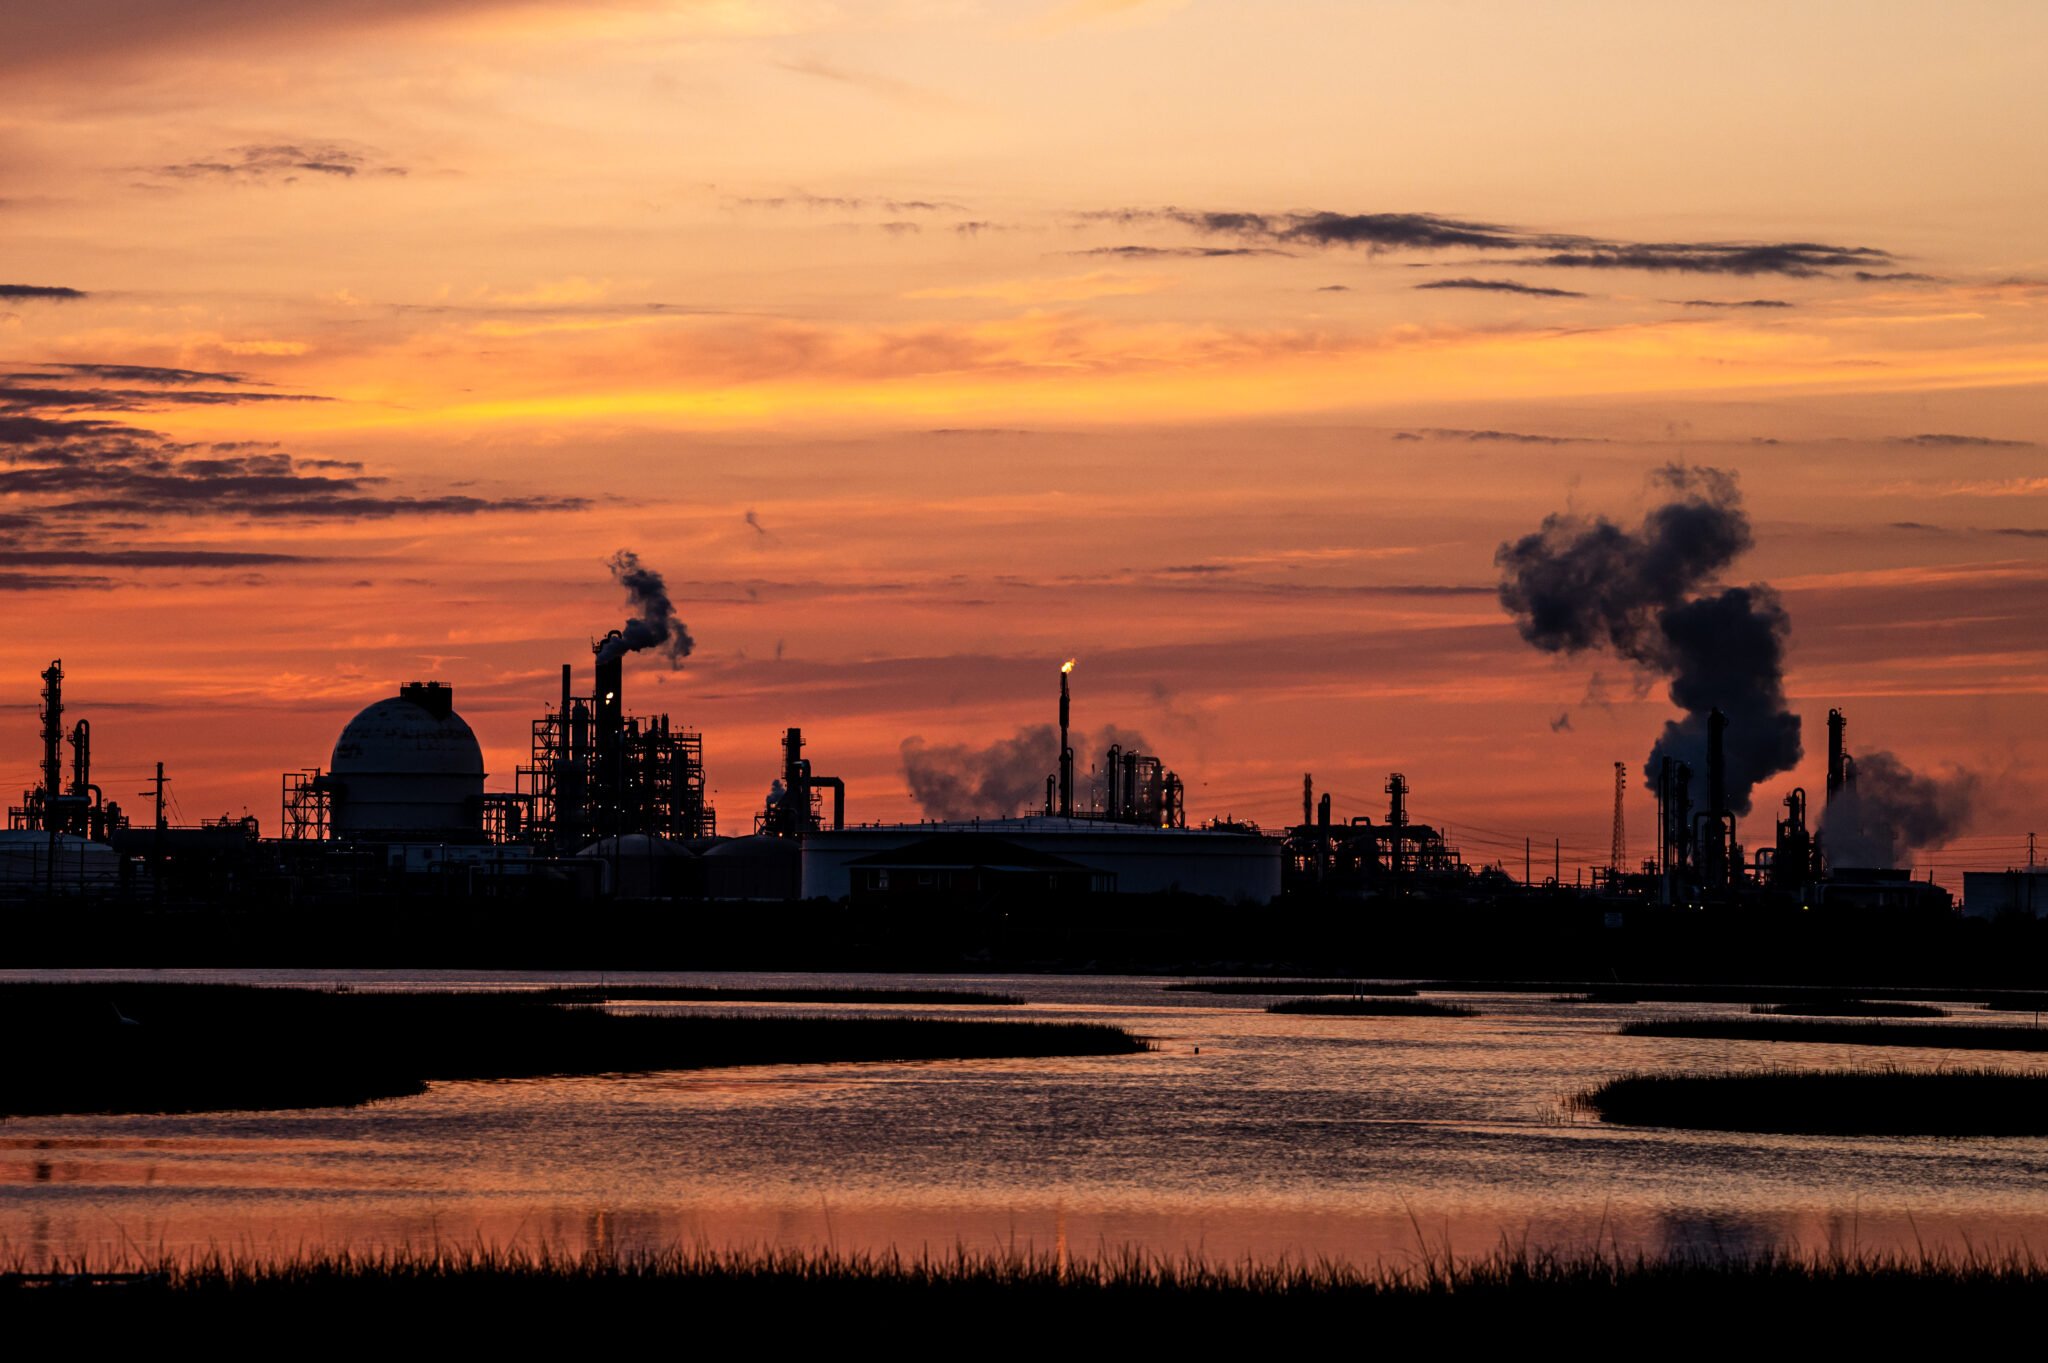 At sunrise or sunset, a Dow petrochemical plant can be seen along the Brazos River, its smokestacks steaming.